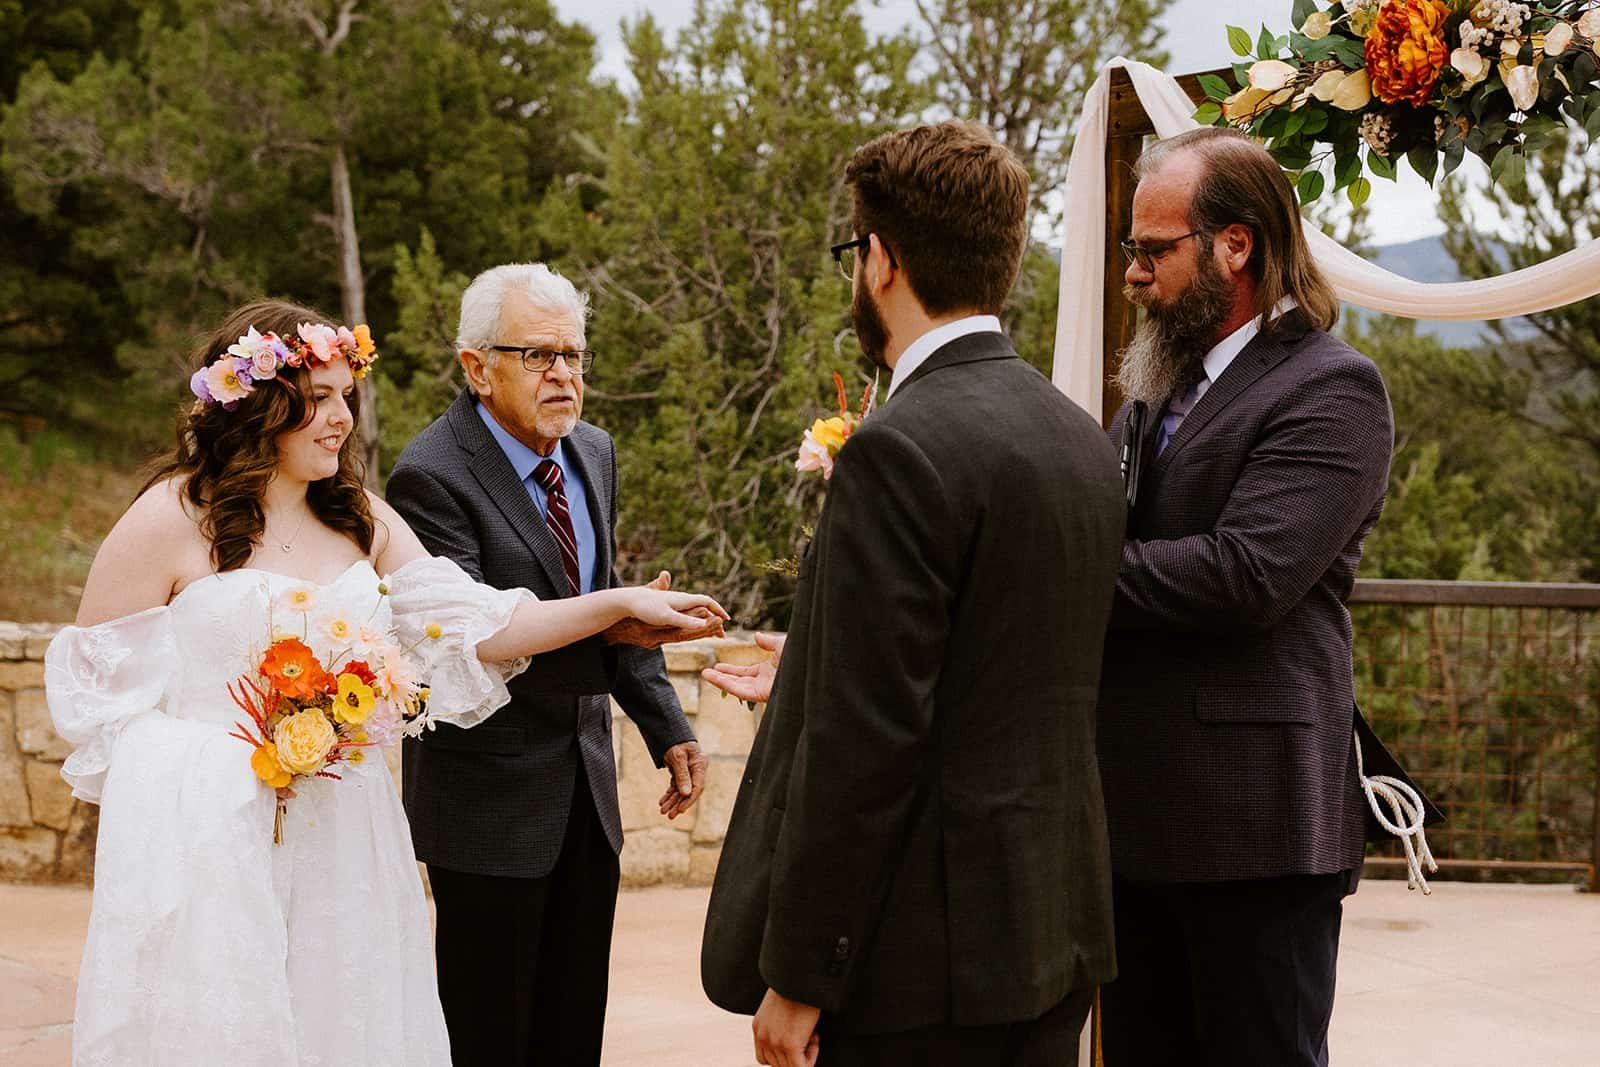 A father passes his daughters hand off to her new husband at the end of the aisle